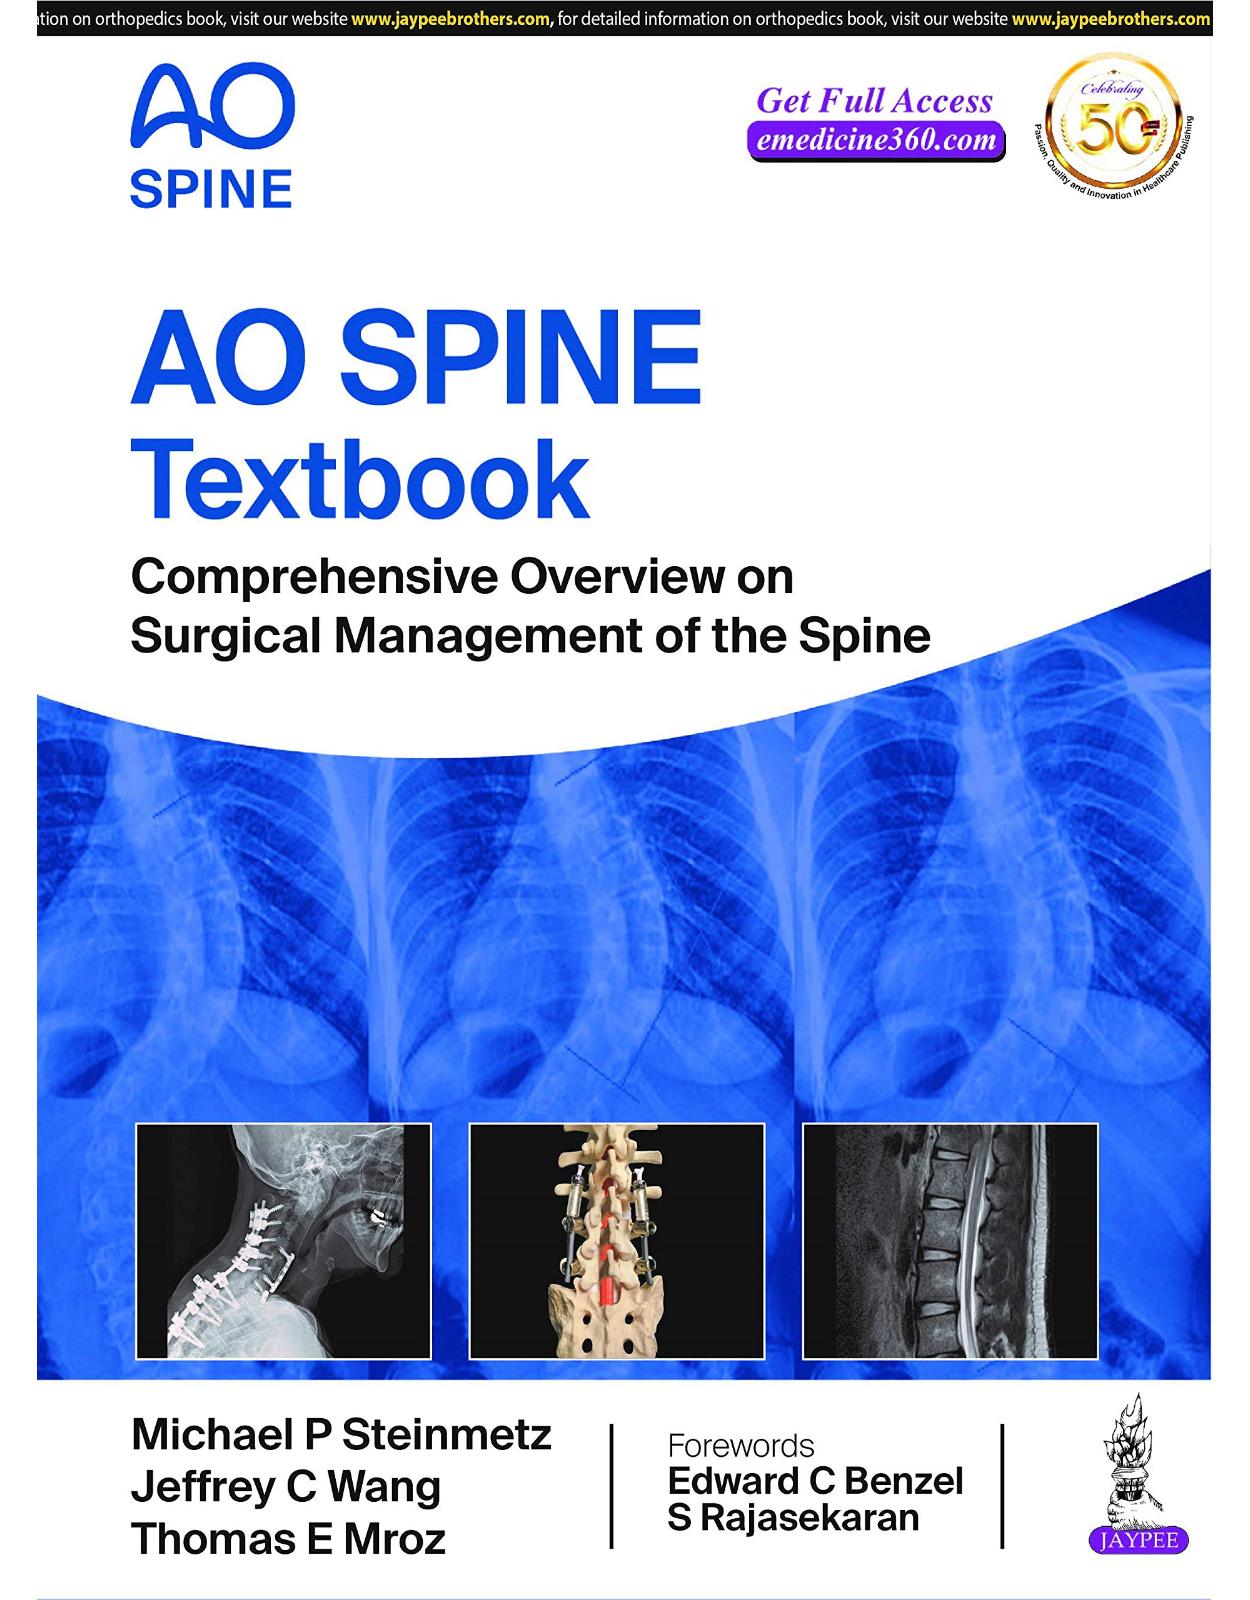 AO SPINE TEXTBOOK: COMPREHENSIVE OVERVIEW ON SURGICAL MANAGEMENT OF THE SPINe